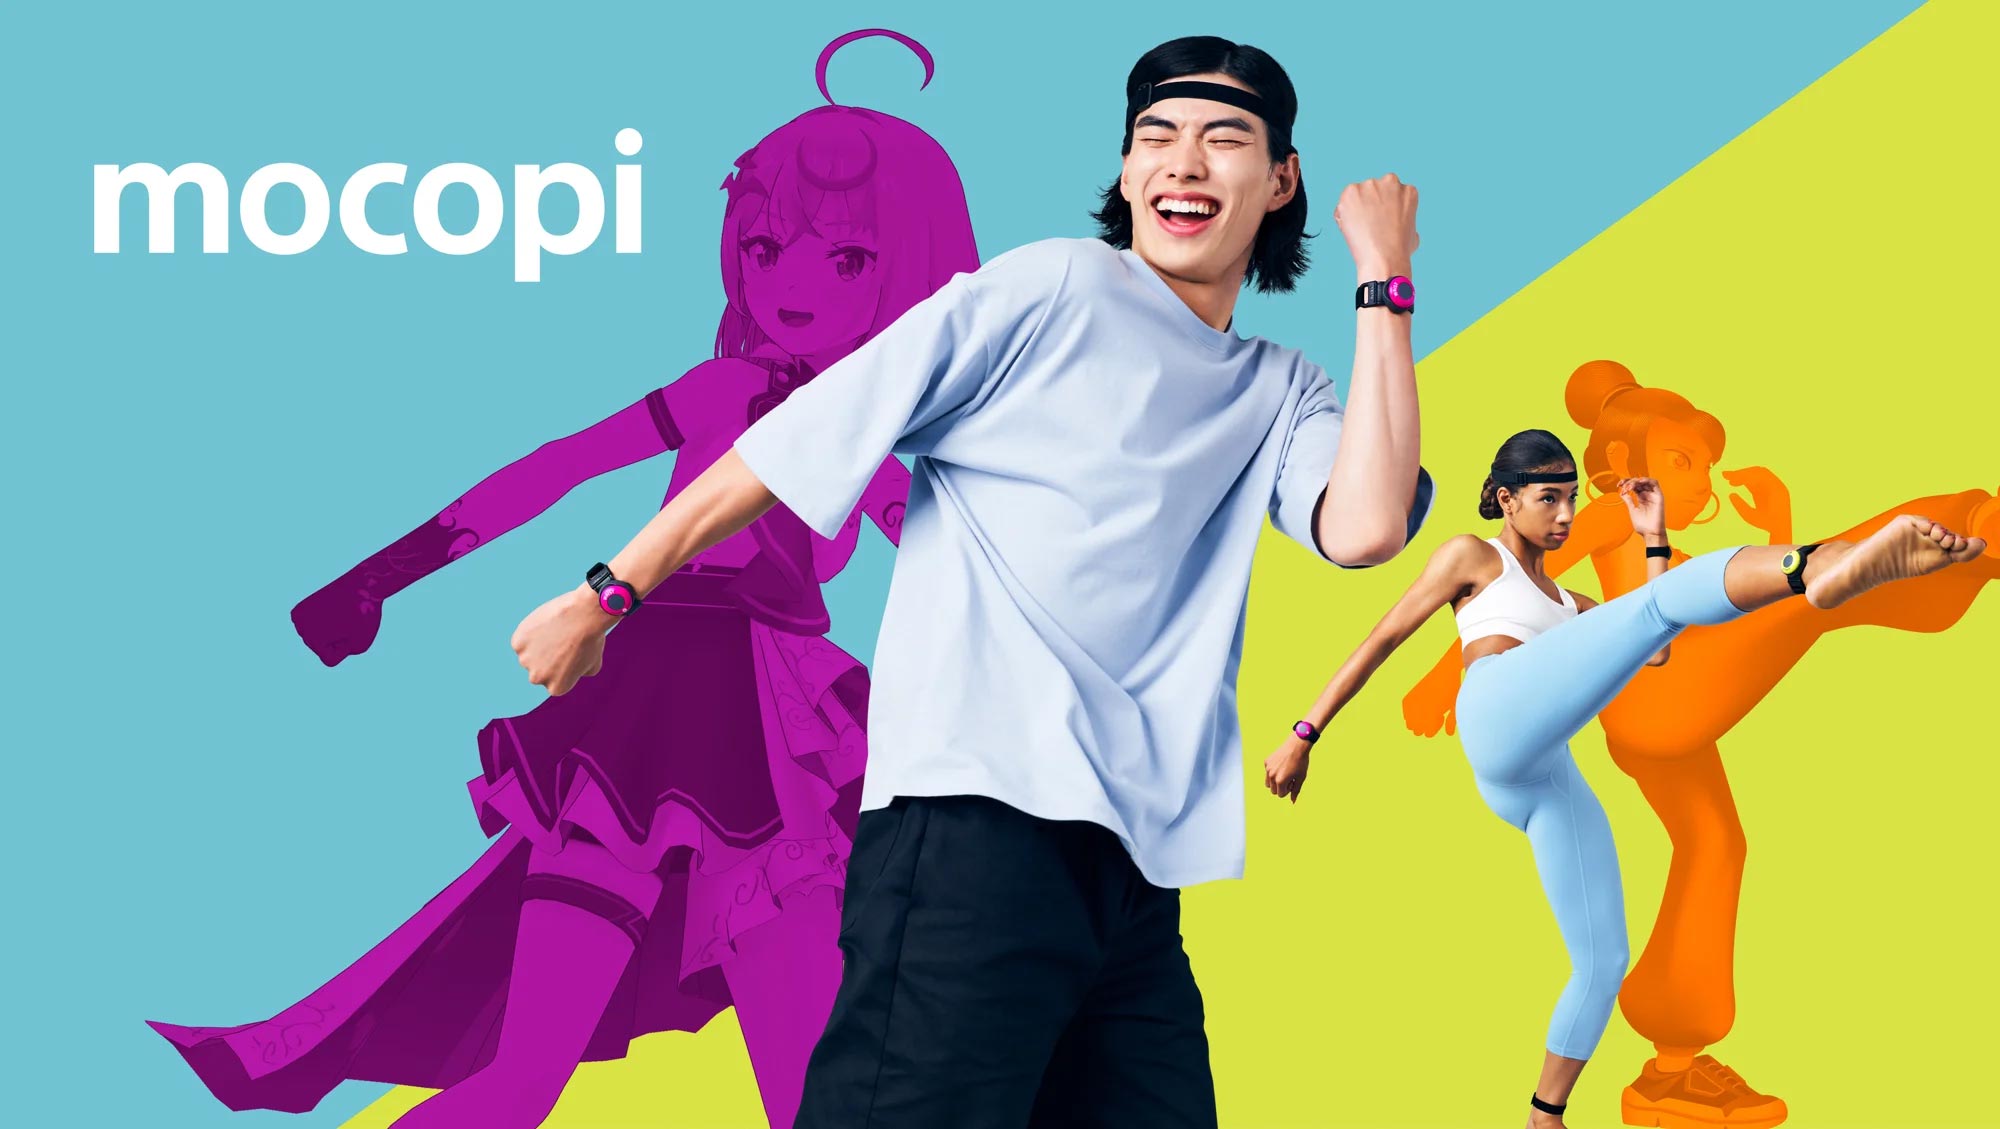 Sony's mobile motion capture system "mocopi" available in U. S. by Jose